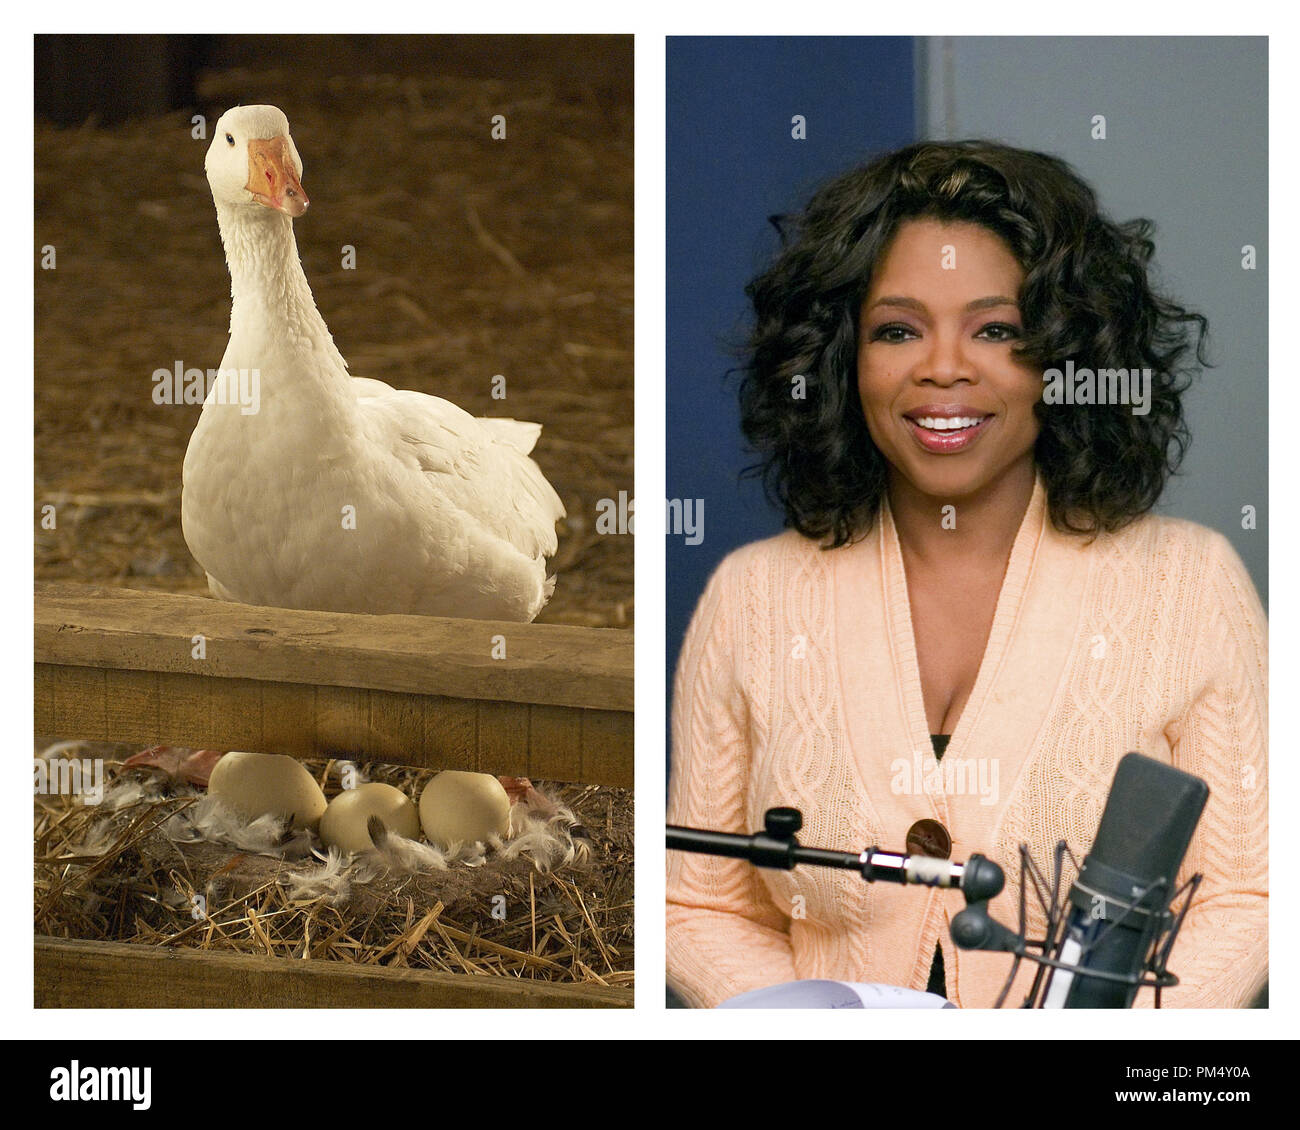 Film Still / Publicity Still from 'Charlotte's Web' Gussy (Oprah Winfrey) © 2006 Paramount Pictures Photo Credit: Suzy Wood / Mark Fellman   File Reference # 30737271THA  For Editorial Use Only -  All Rights Reserved Stock Photo